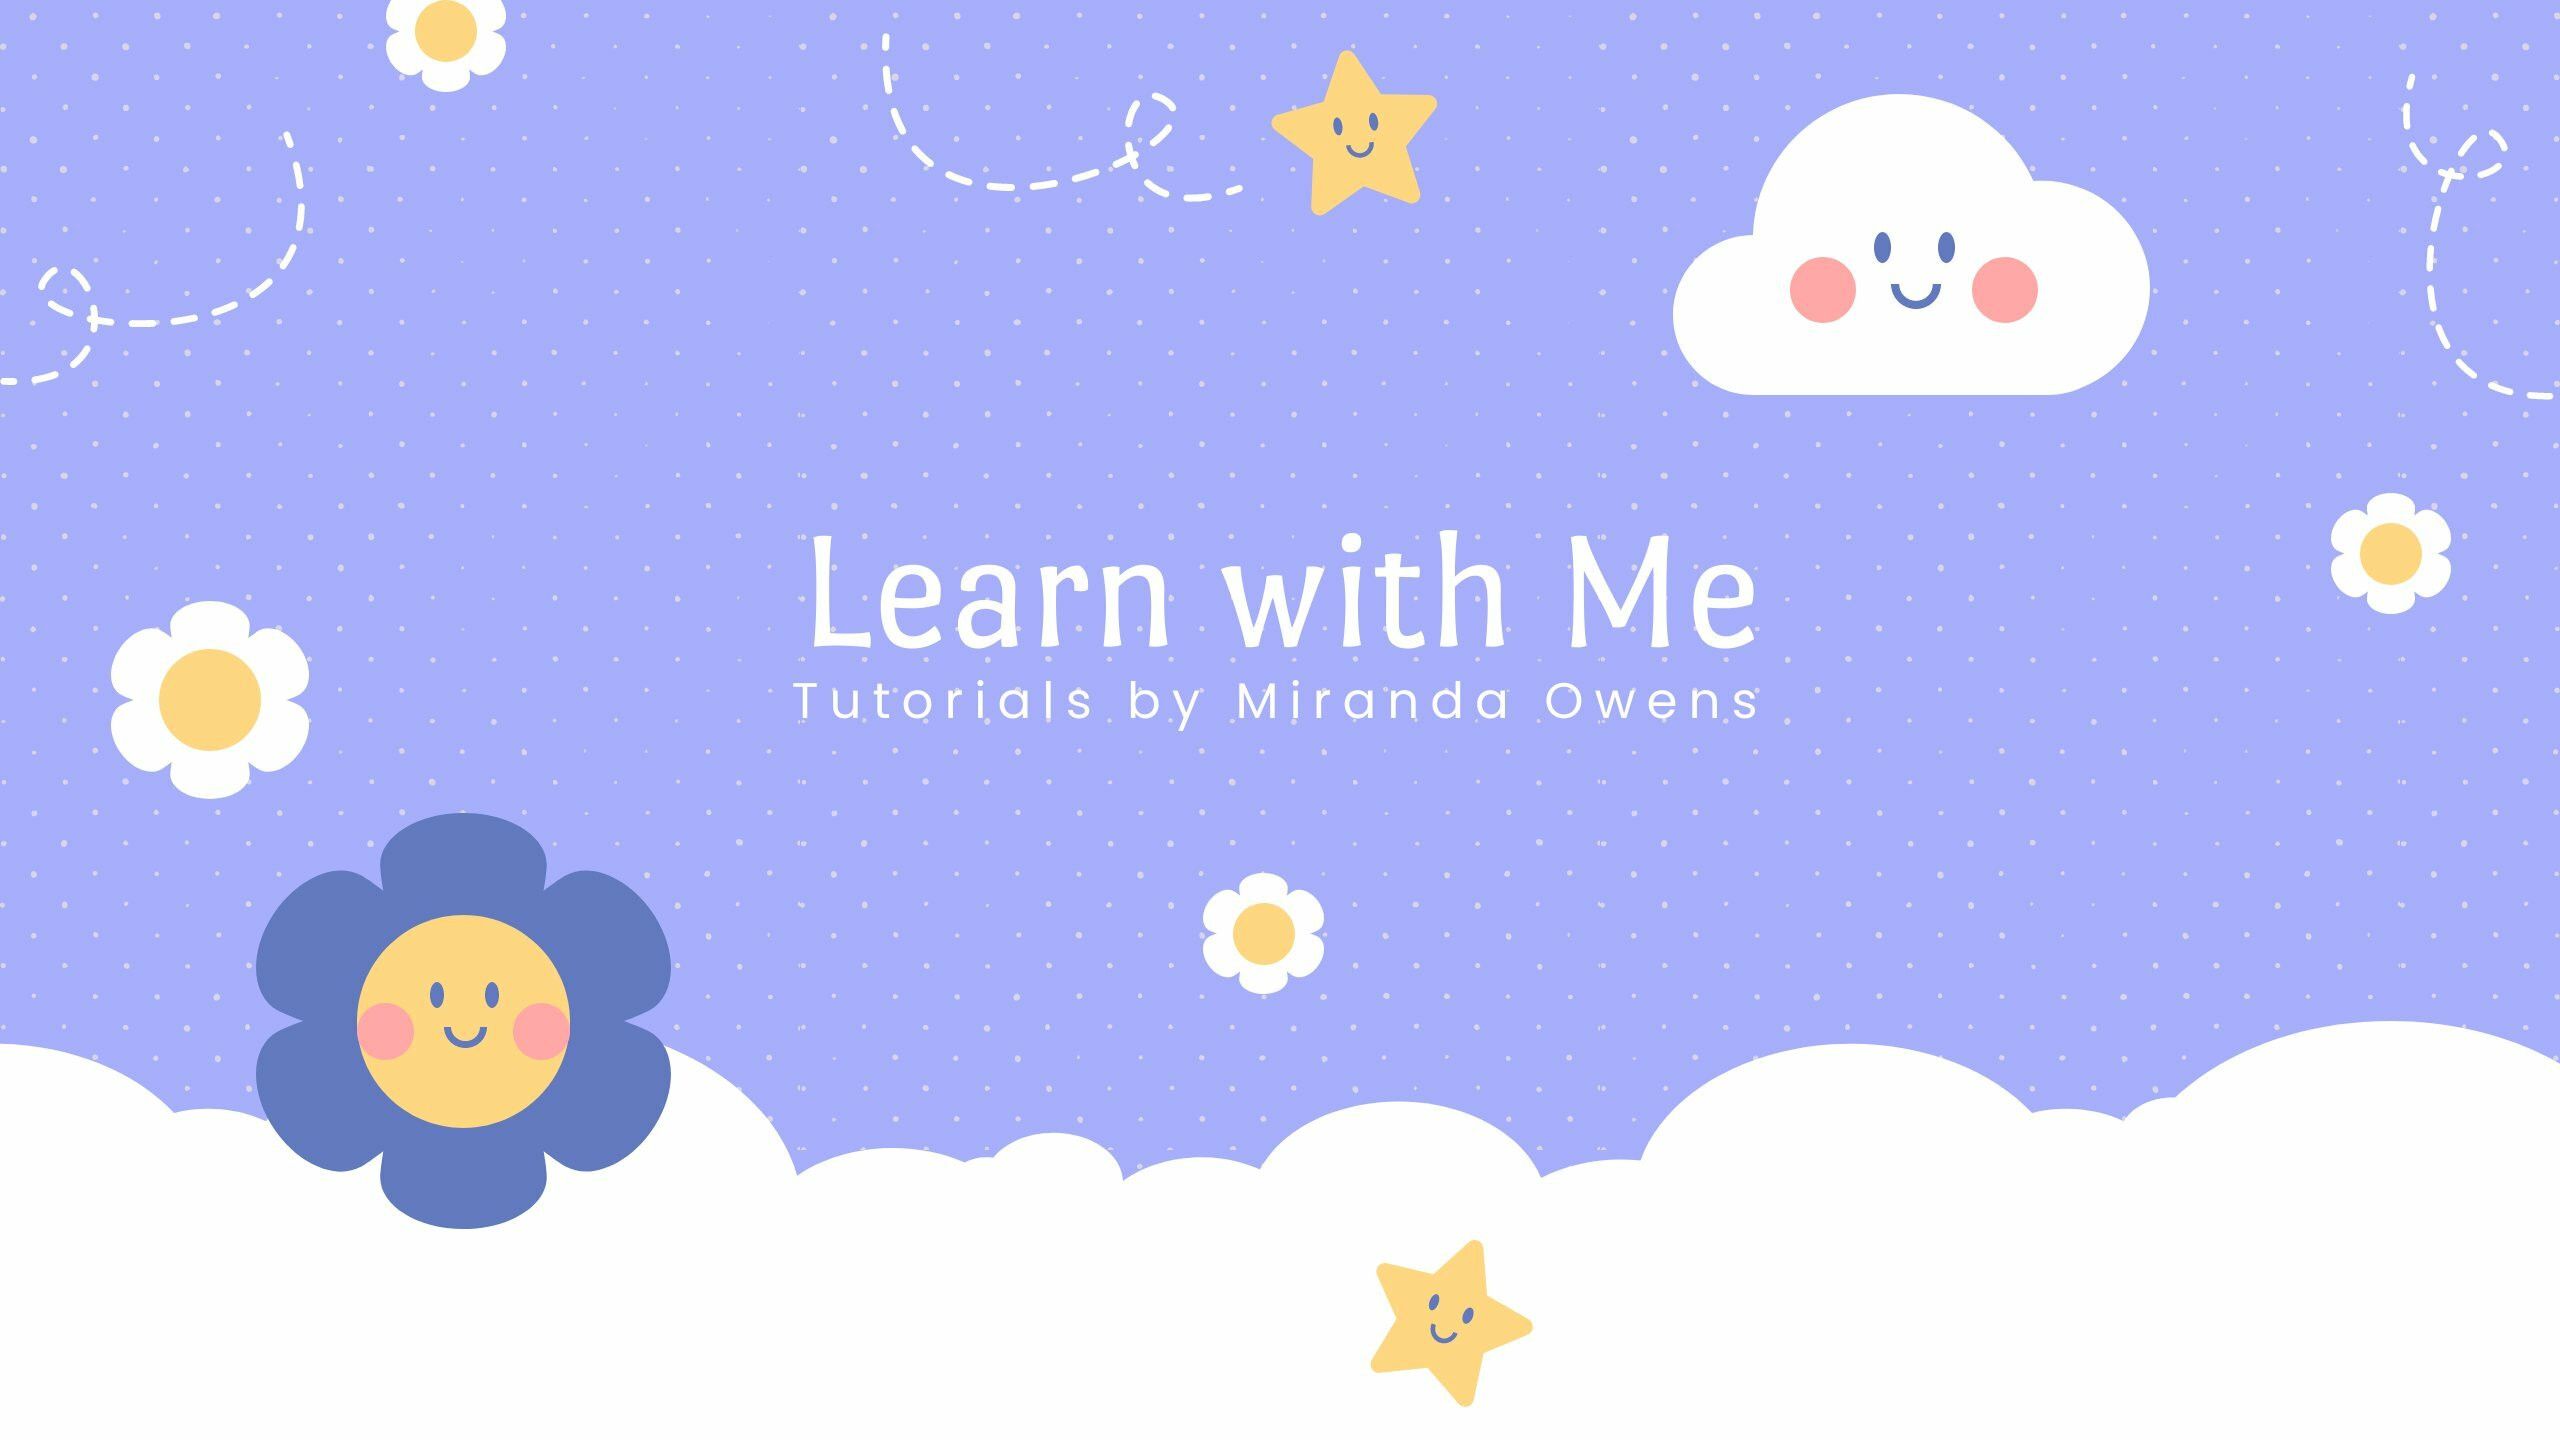 Learn with Me tutorials by Miranda Owens - YouTube